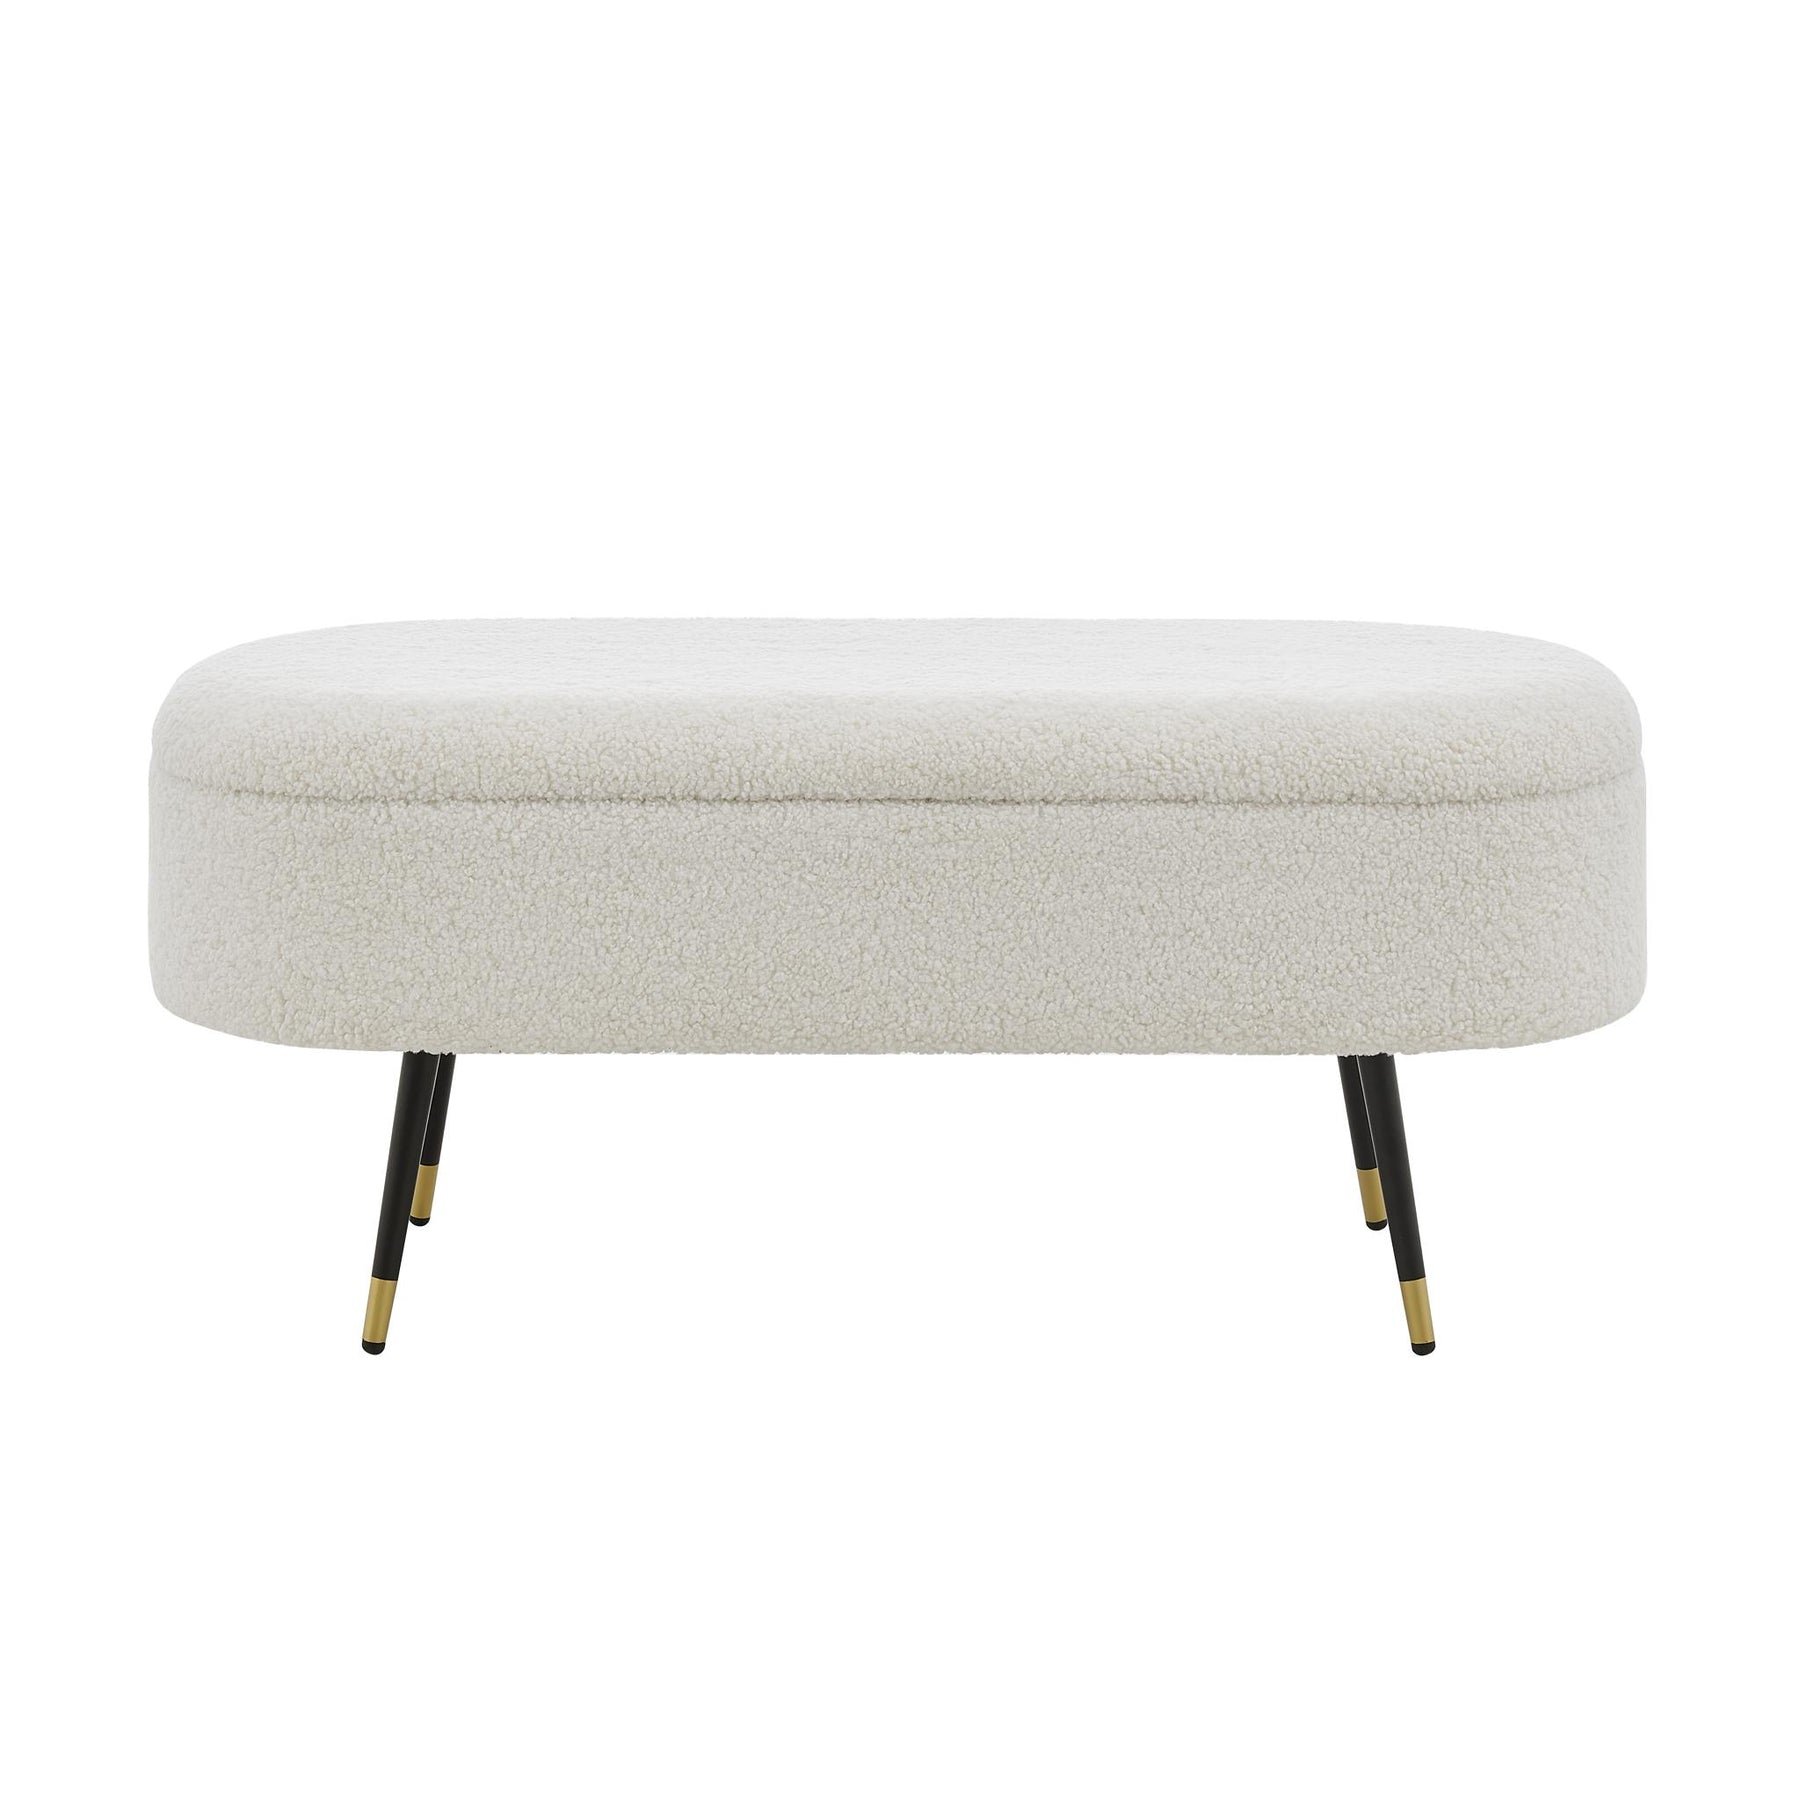 Phoebe KD Faux Shearling Fabric Storage Bench w/ Gold Tip Metal Legs by New Pacific Direct - 1600076